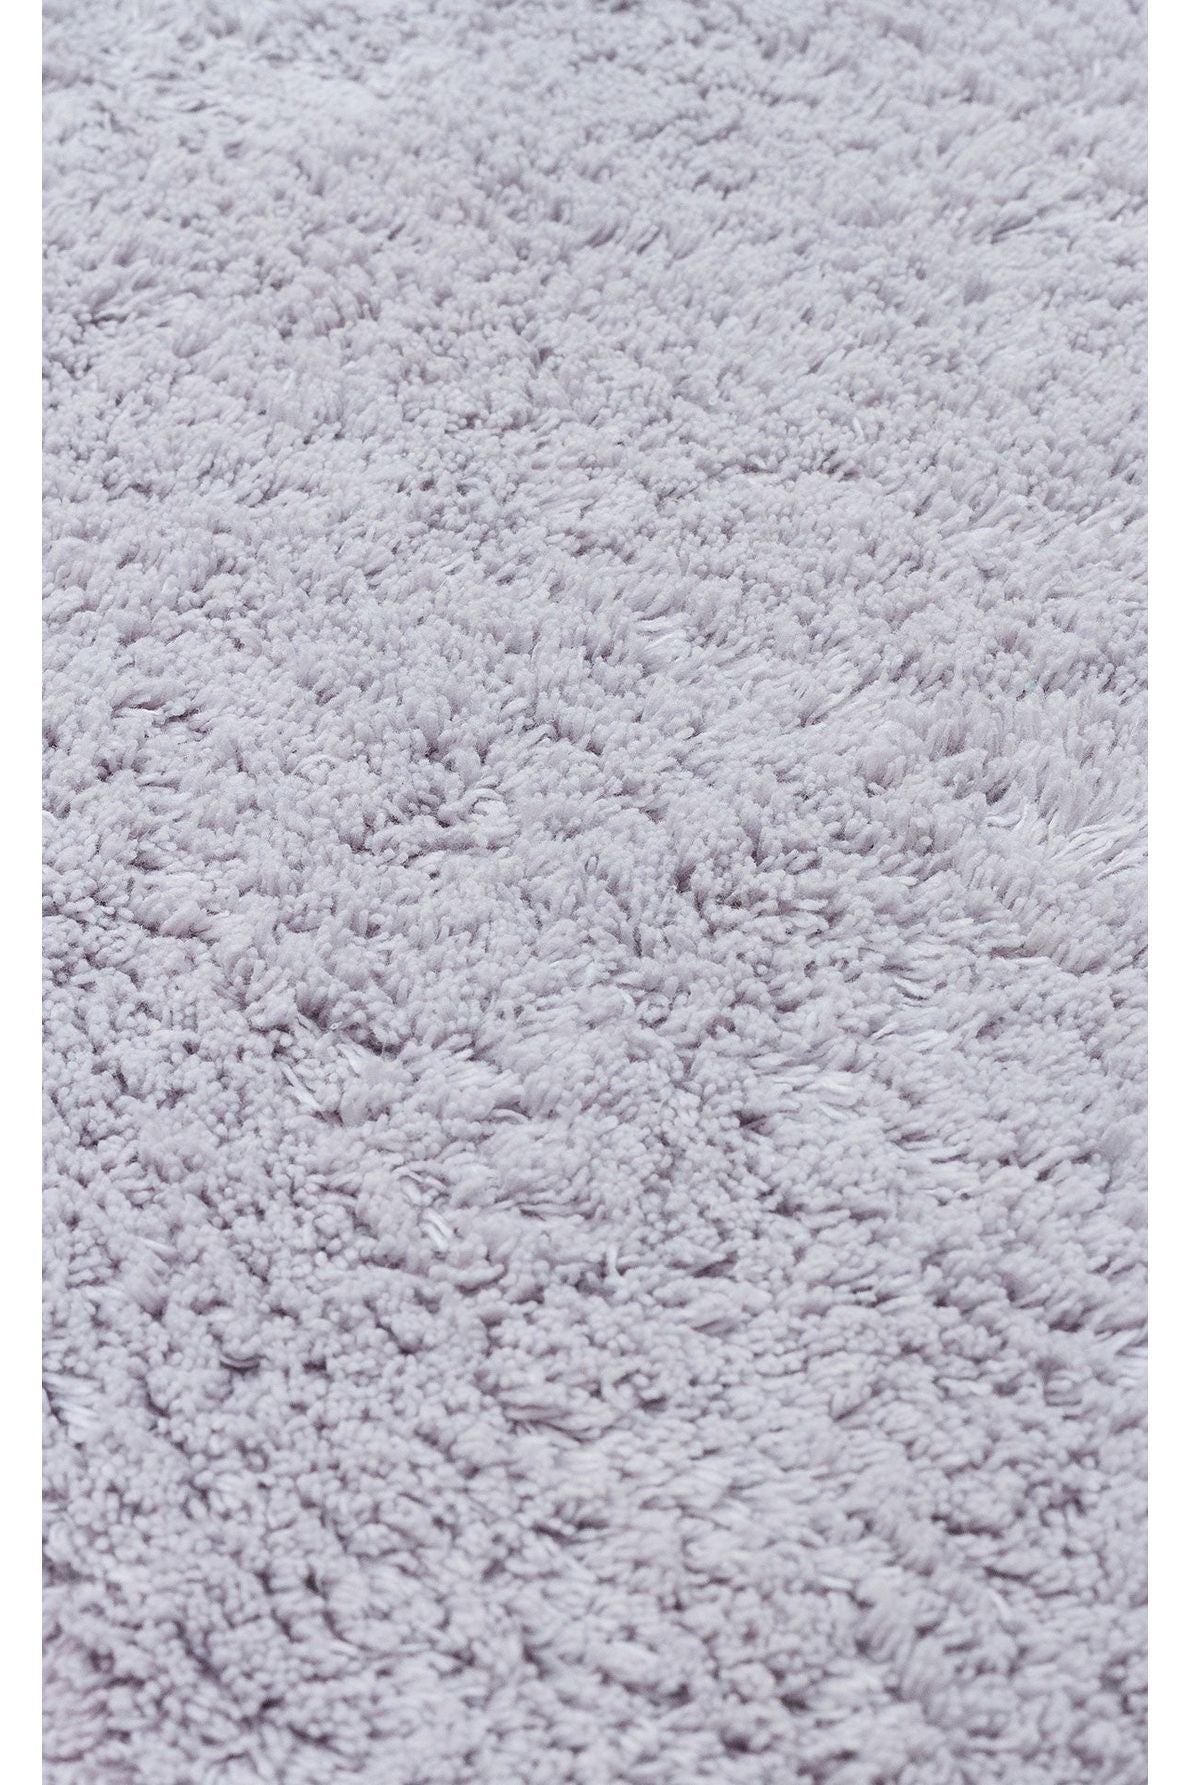 #Turkish_Carpets_Rugs# #Modern_Carpets# #Abrash_Carpets#Washable, Non-Slippary, Natural Baby Rugs With CottonCbn Plain Grey Q